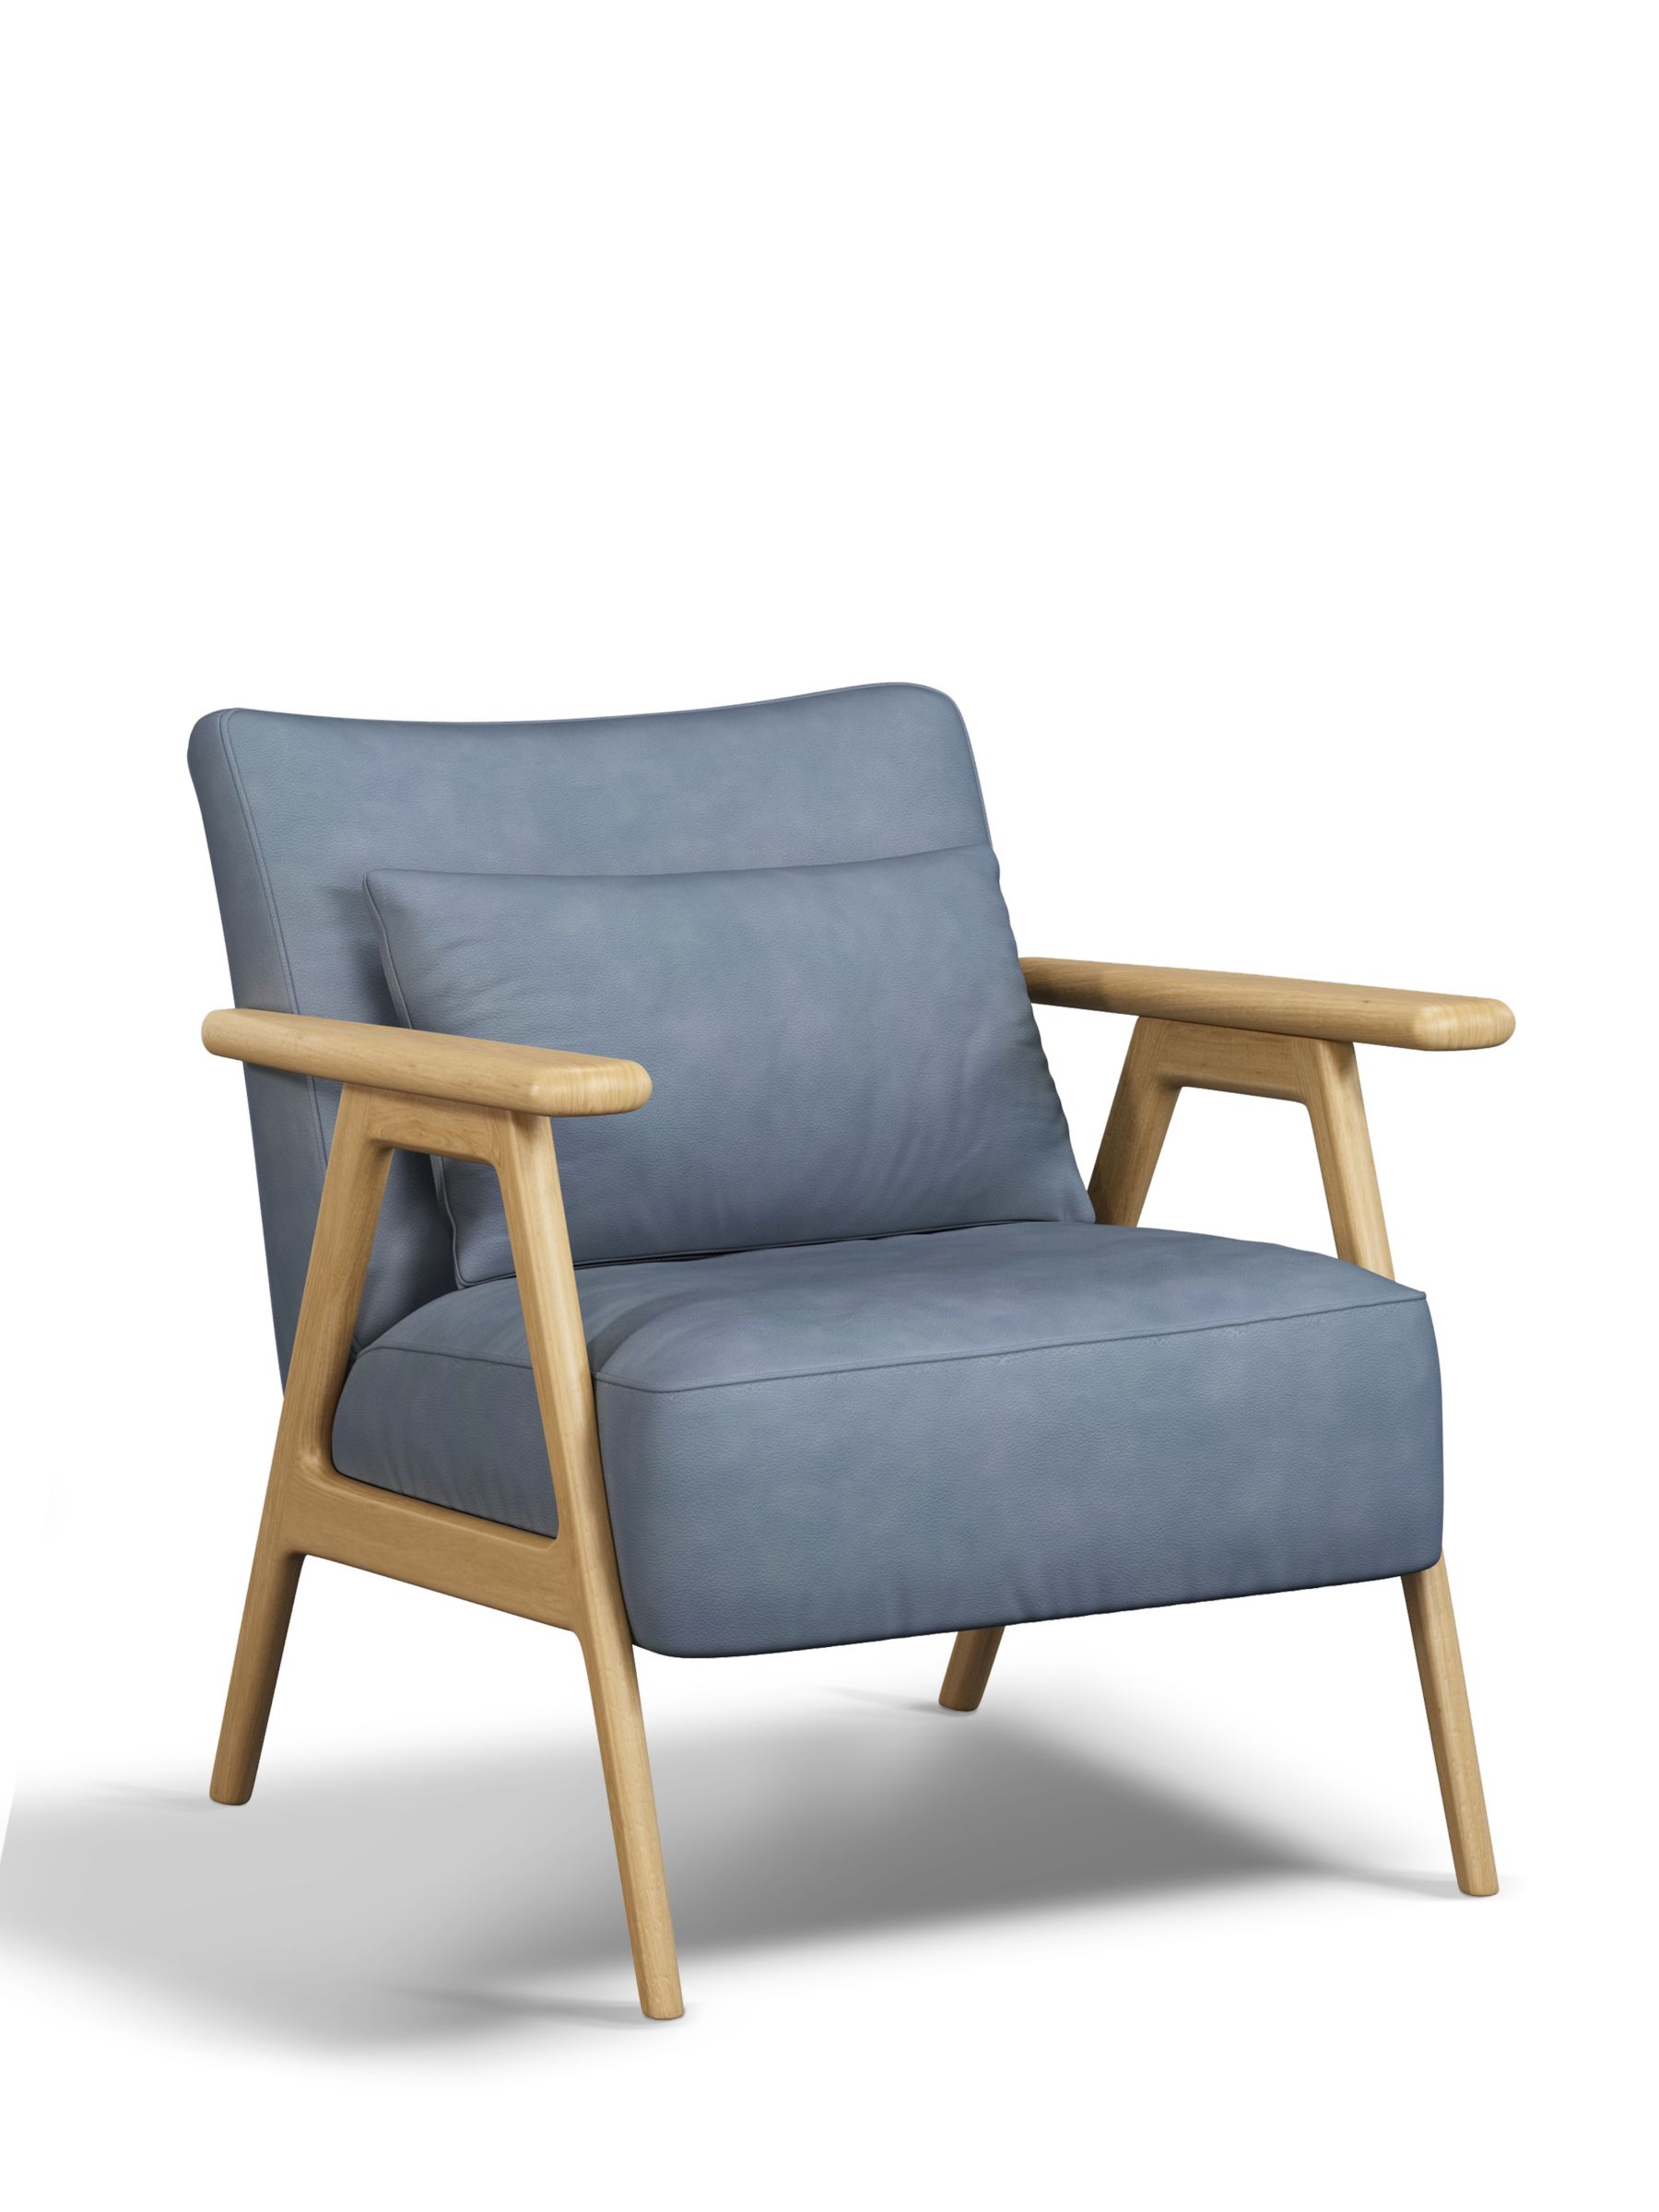 John Lewis Partners Hendricks Leather Accent Chair Light Wood Frame Soft Touch Blue At John Lewis Partners